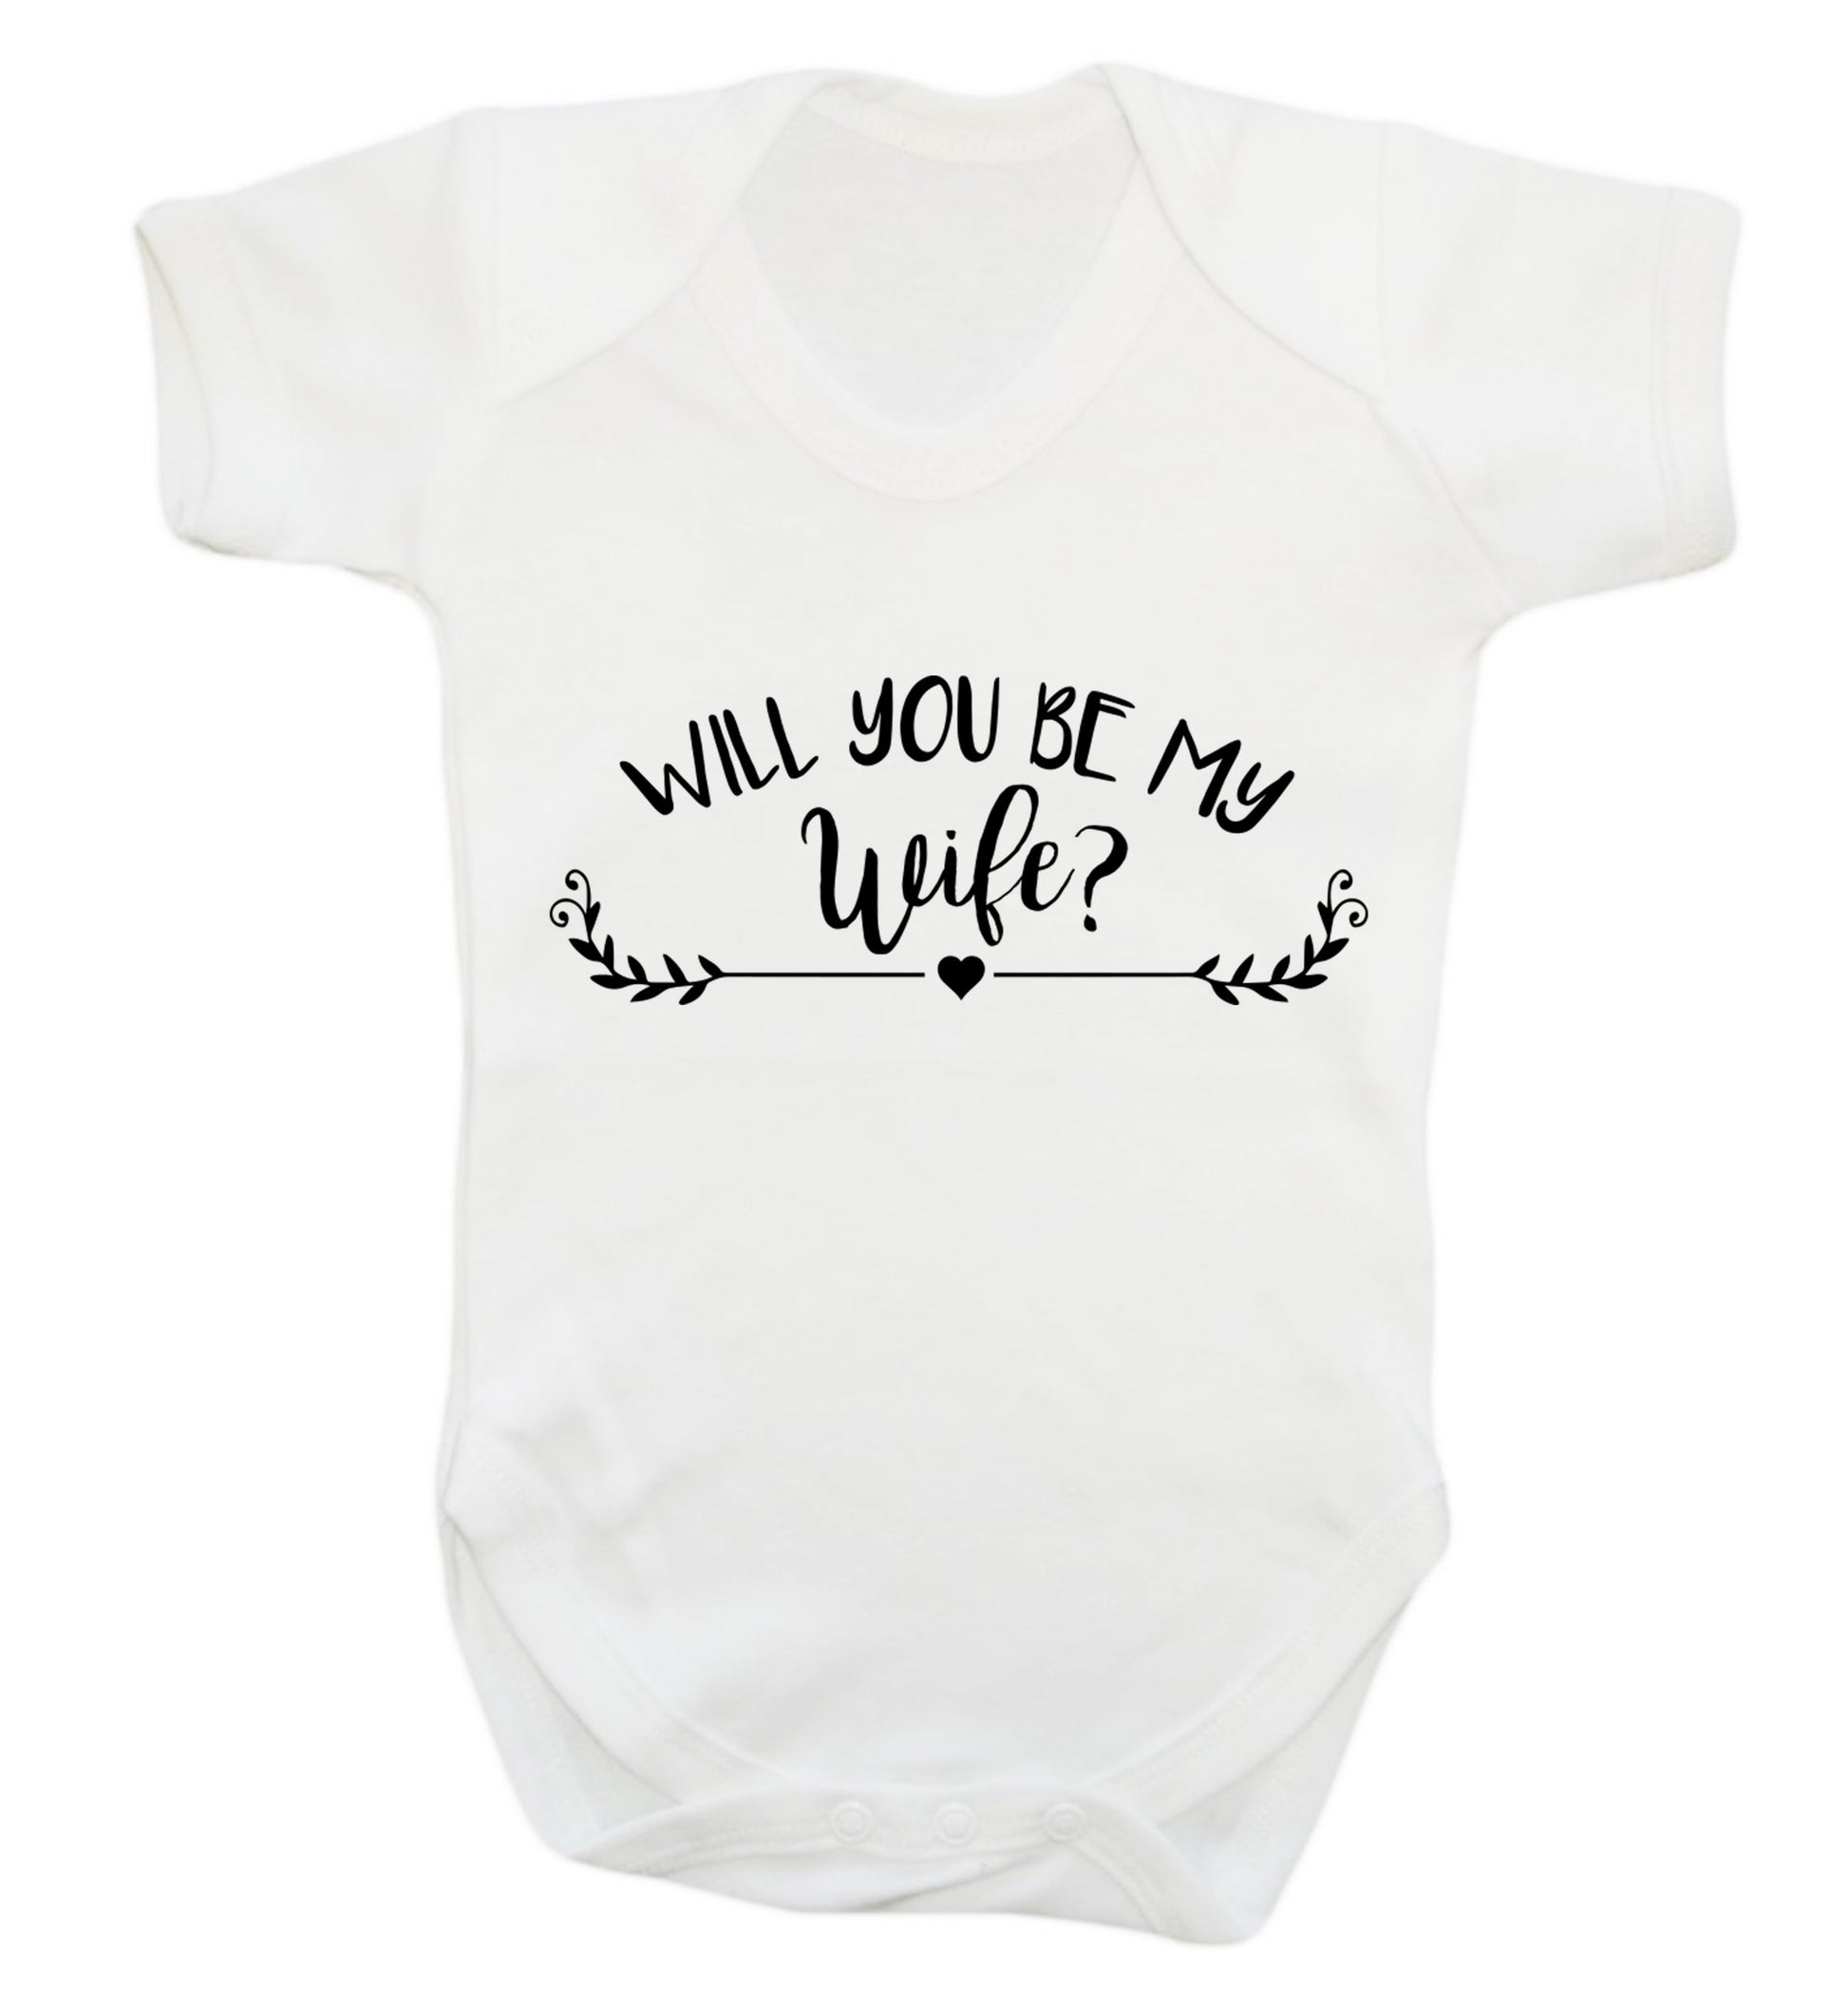 Will you be my wife? Baby Vest white 18-24 months